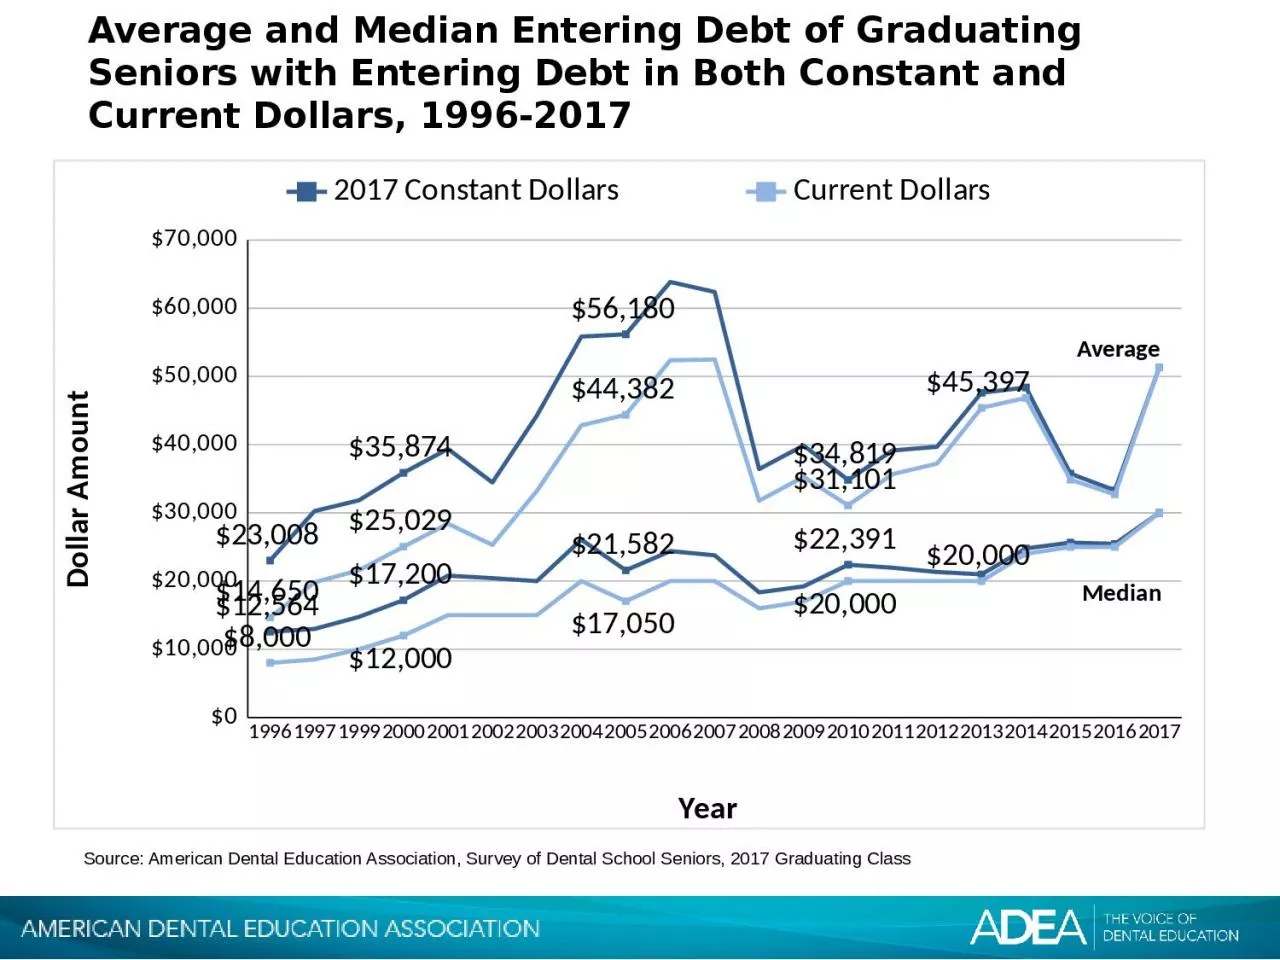 Average and Median Entering Debt of Graduating Seniors with Entering Debt in Both Constant